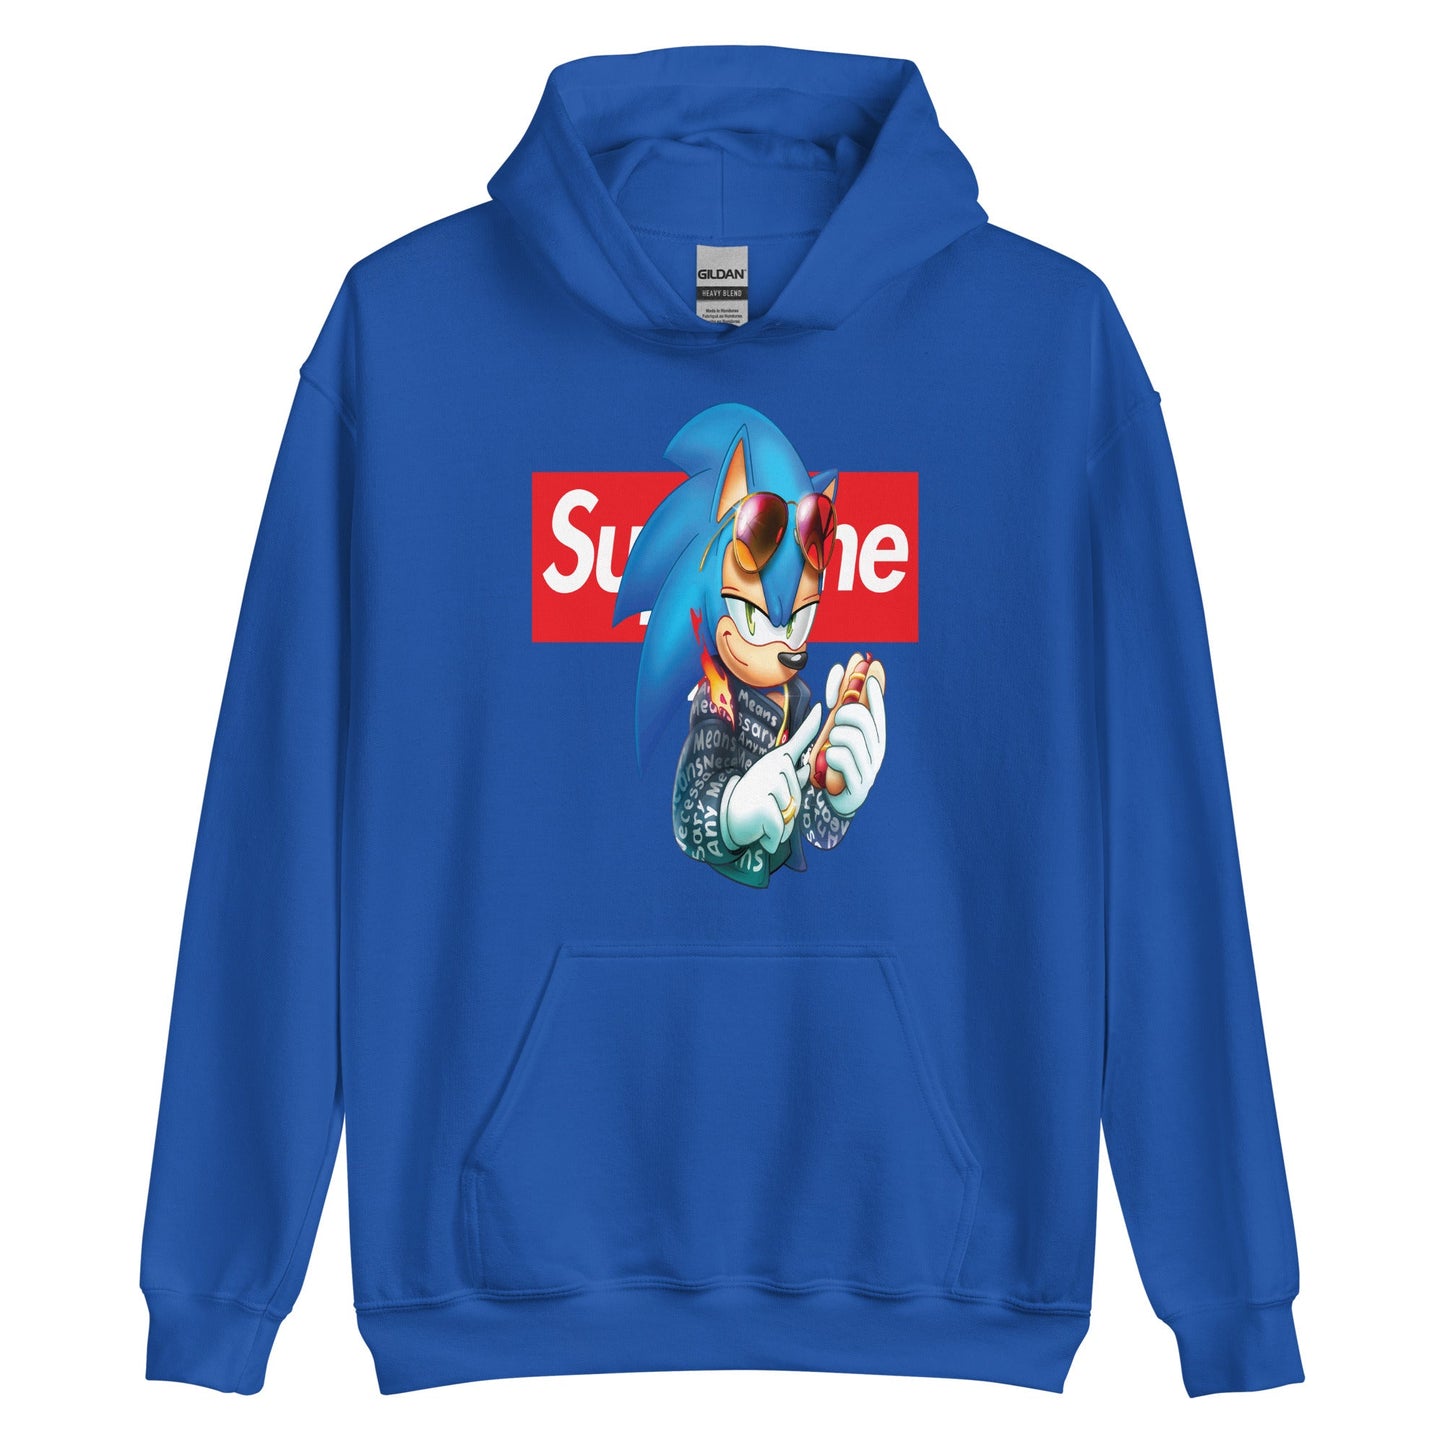 sup sonic hoodie - The Truth Graphics